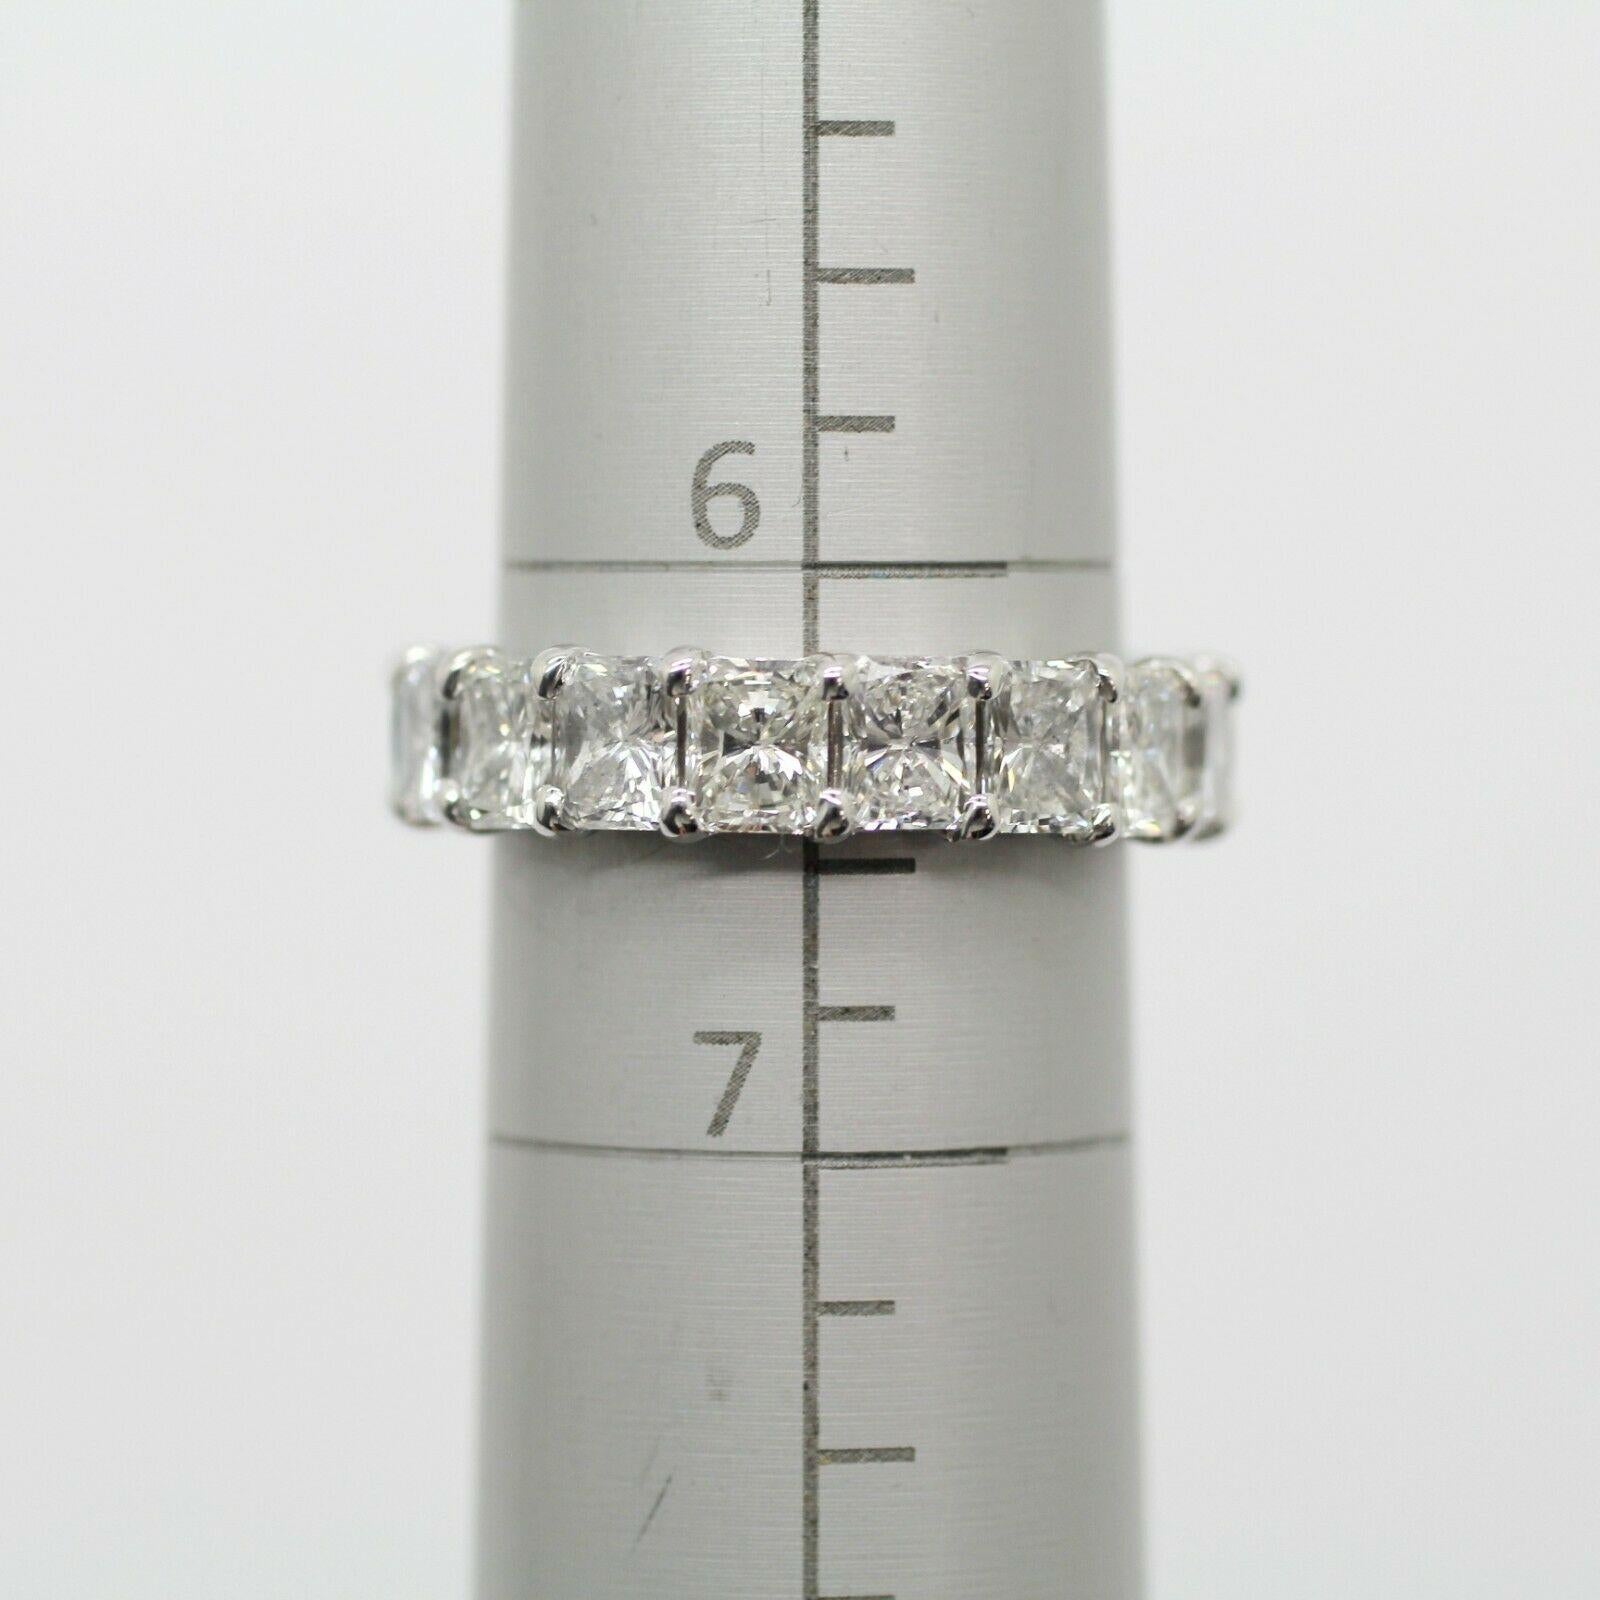 Radiant Cut Diamond 5.67cts. Eternity Ring Set in 14k White Gold In New Condition For Sale In Los Angeles, CA